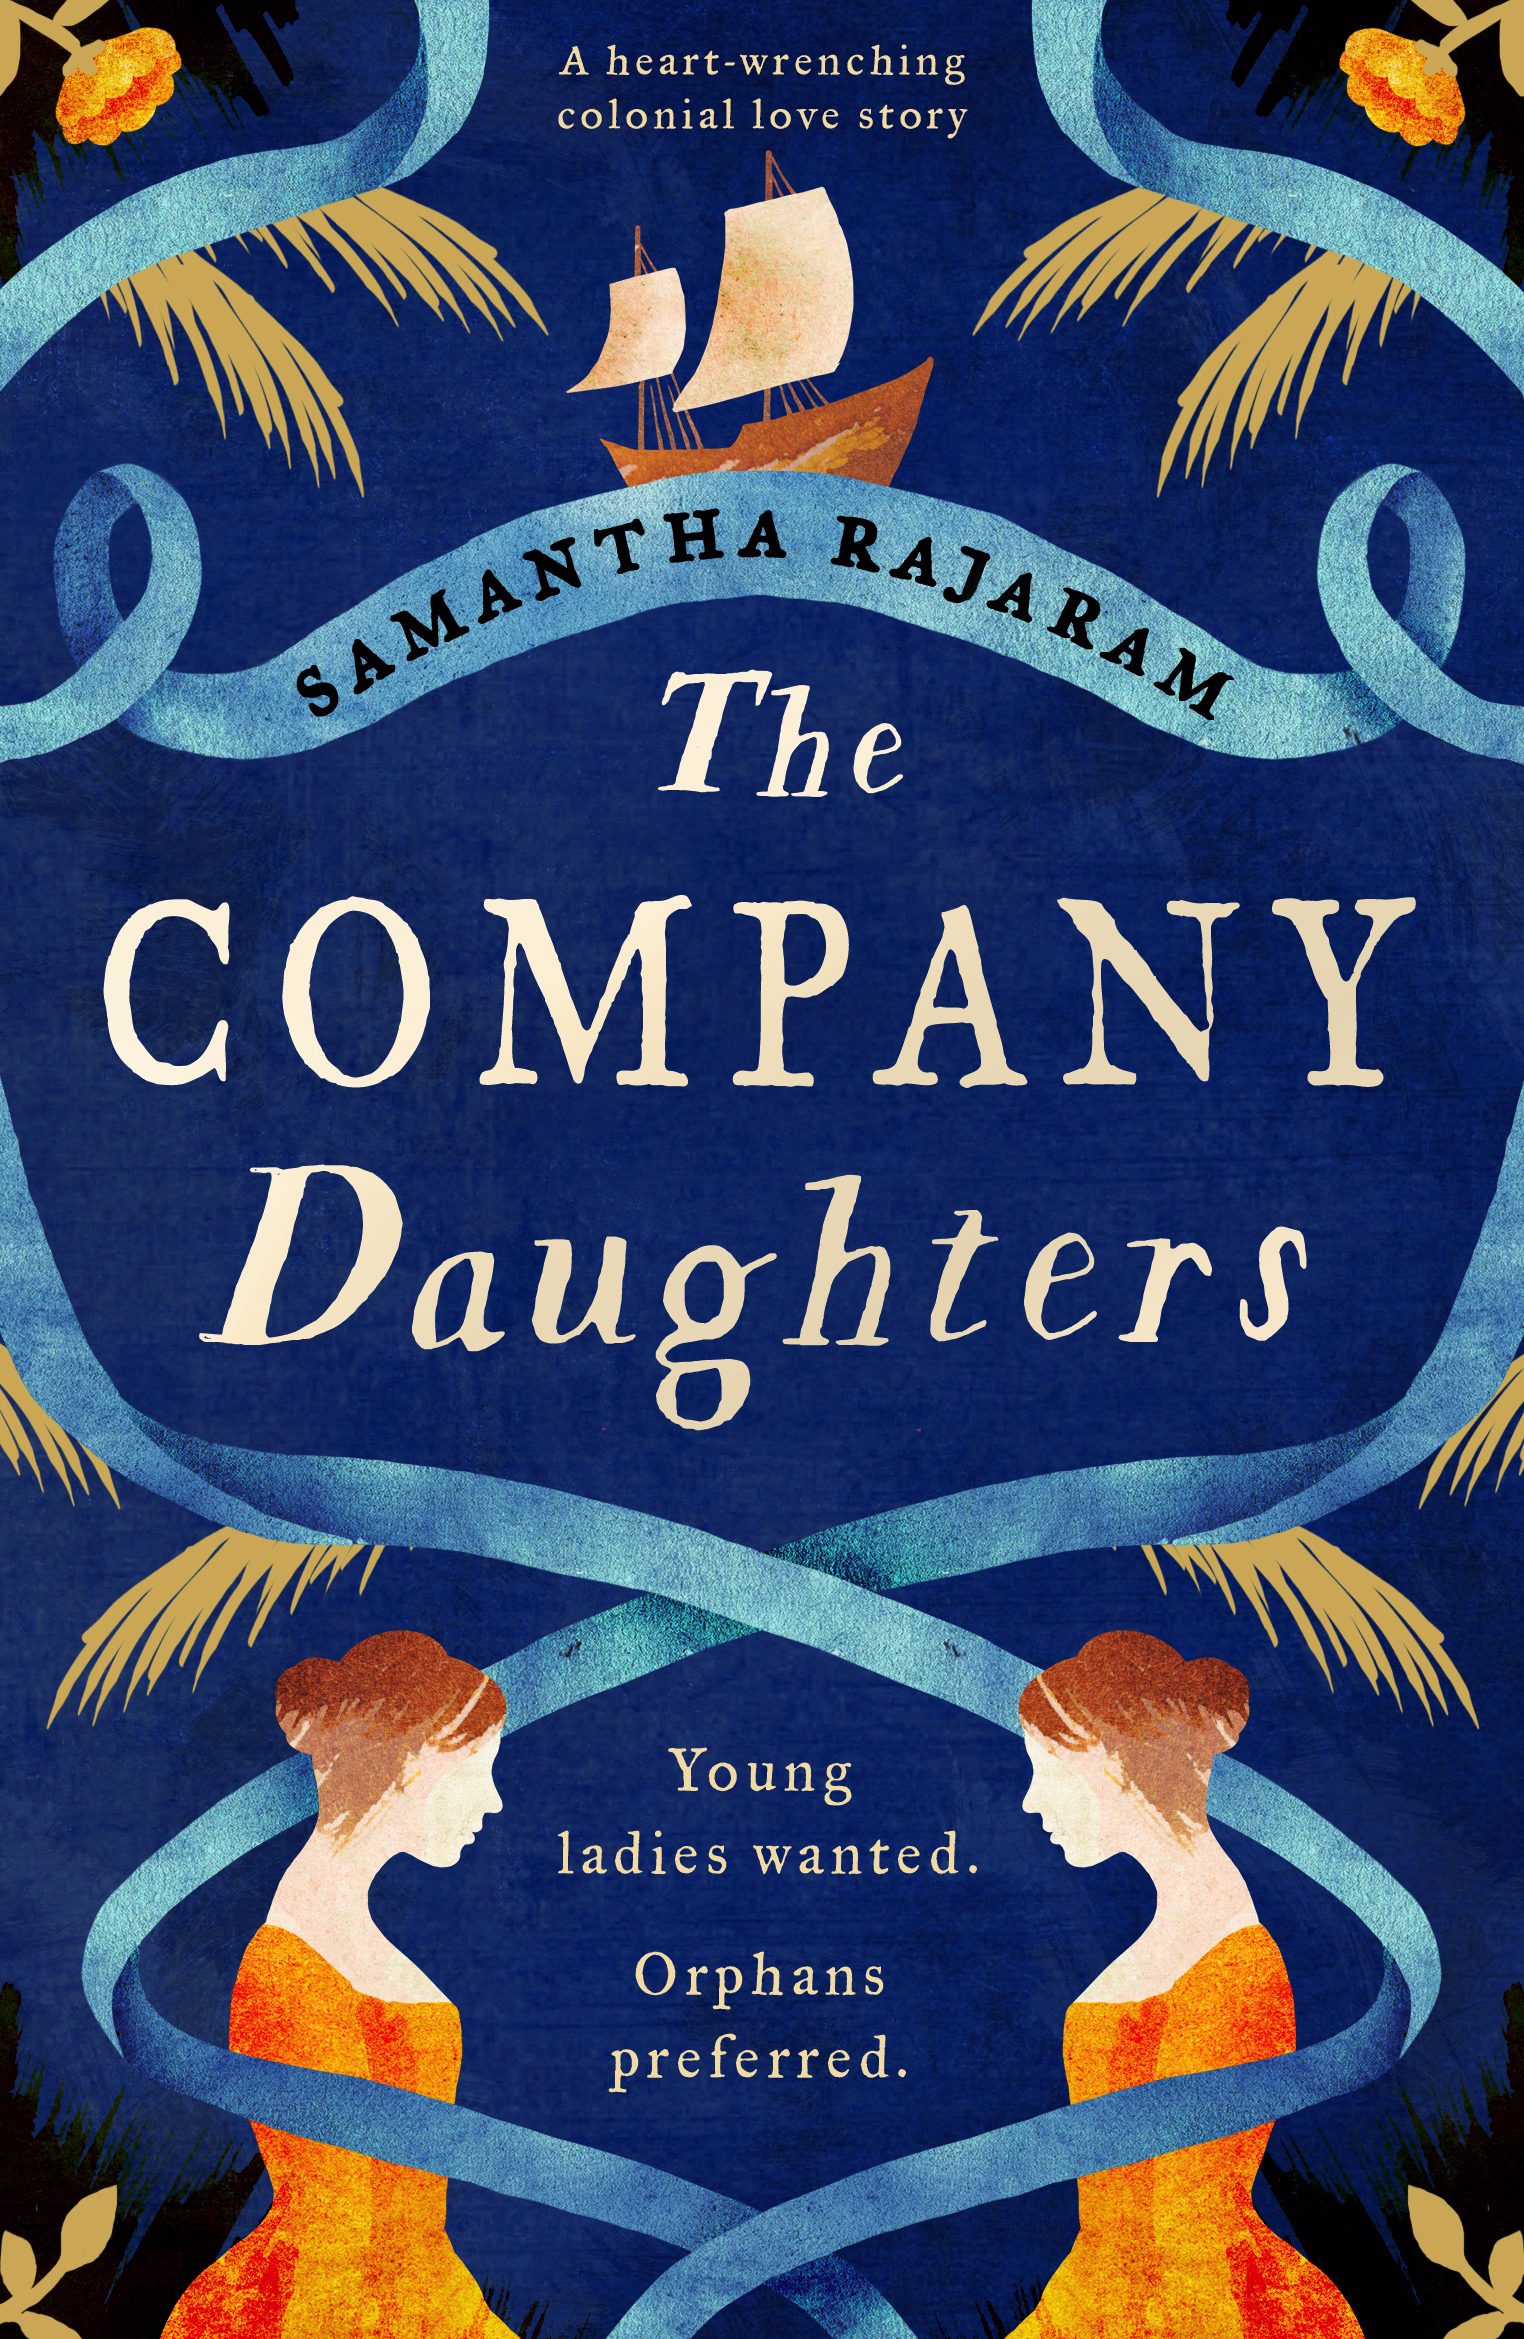 The Company Daughters book cover